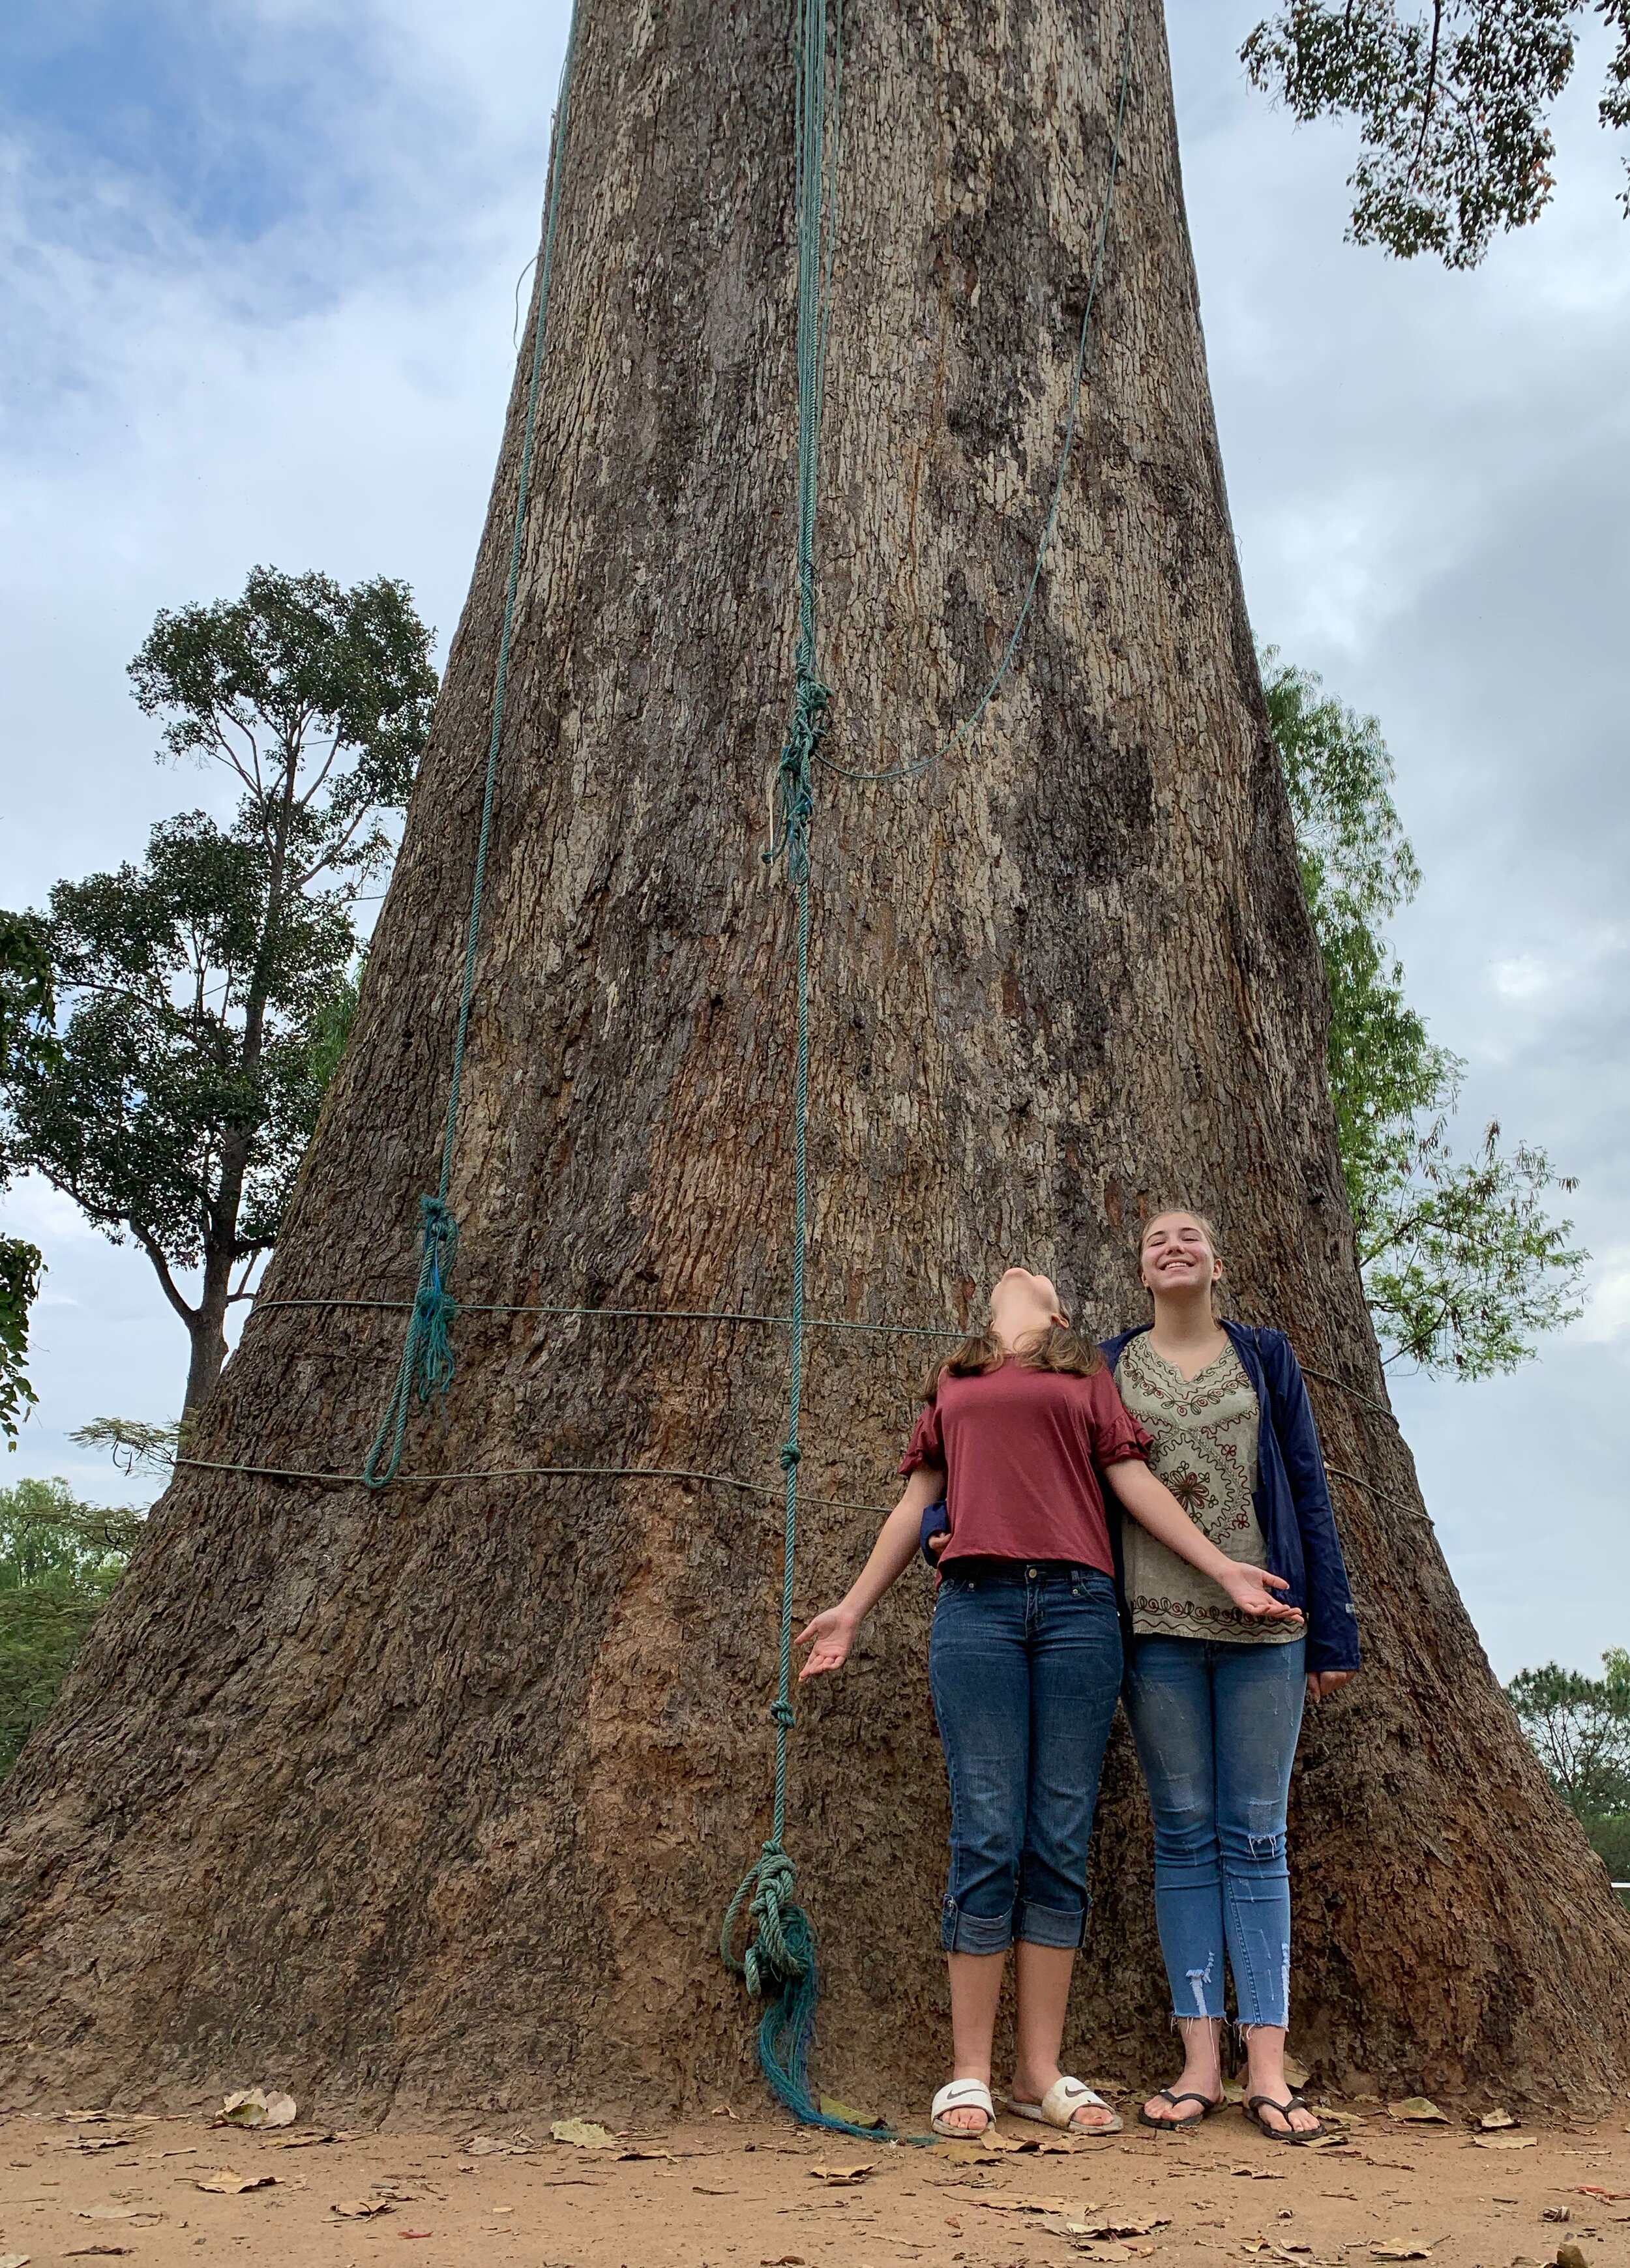 This ancient tree was planted by King Alaunphaya in Shan State, Myanmar nearly 1,000 years ago. It is about 220 ft hight and 40 ft around at the base.